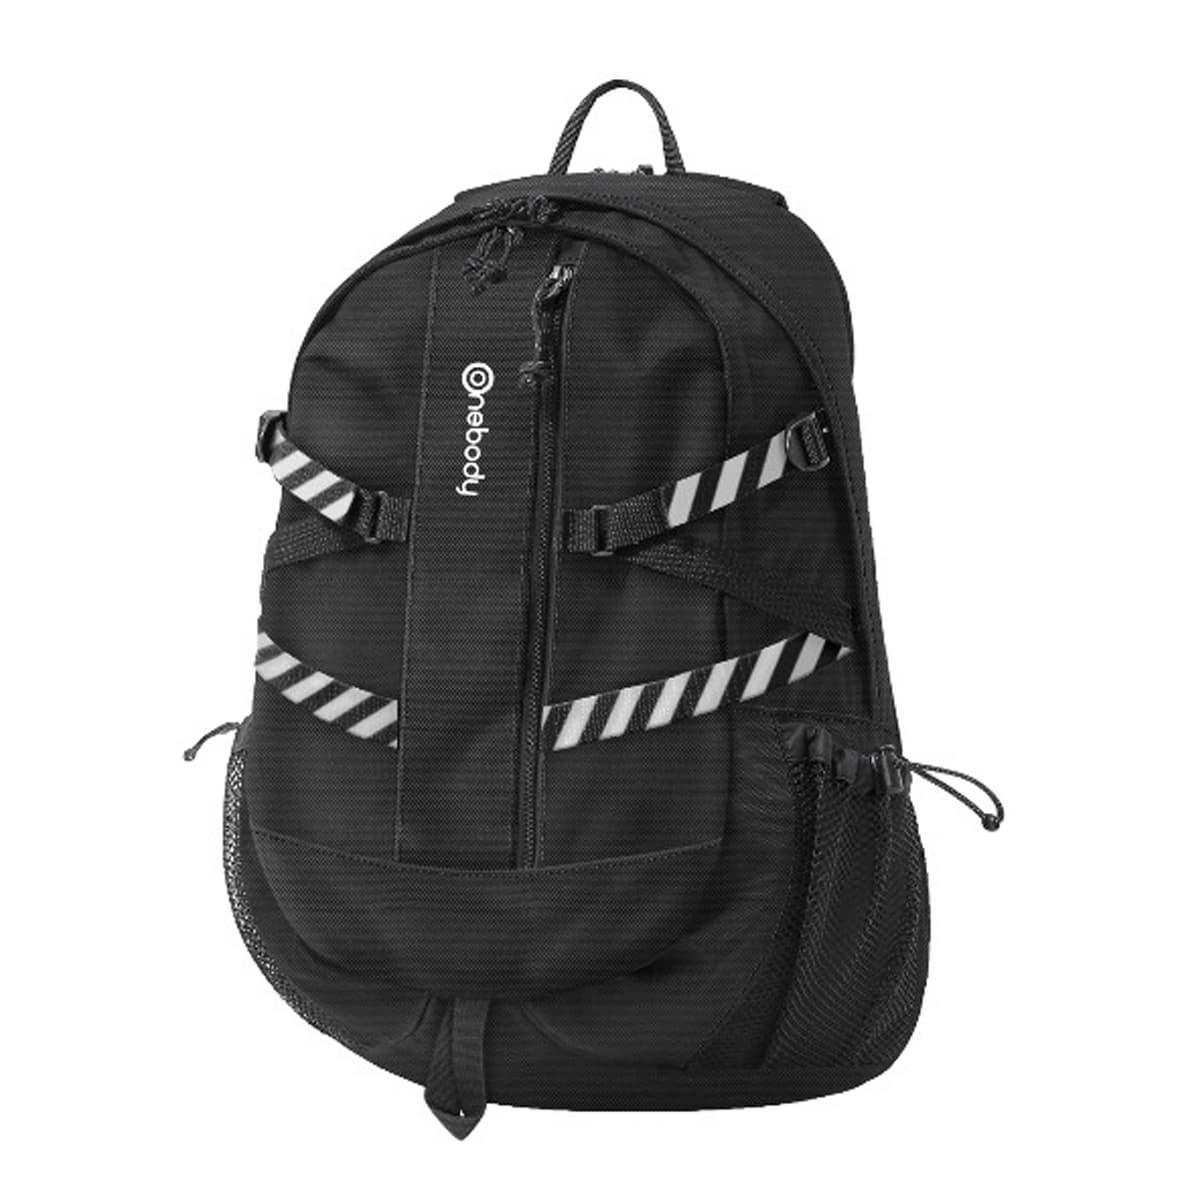 Onebody Laptop Backpack Bag_04 for Travel Business Casual